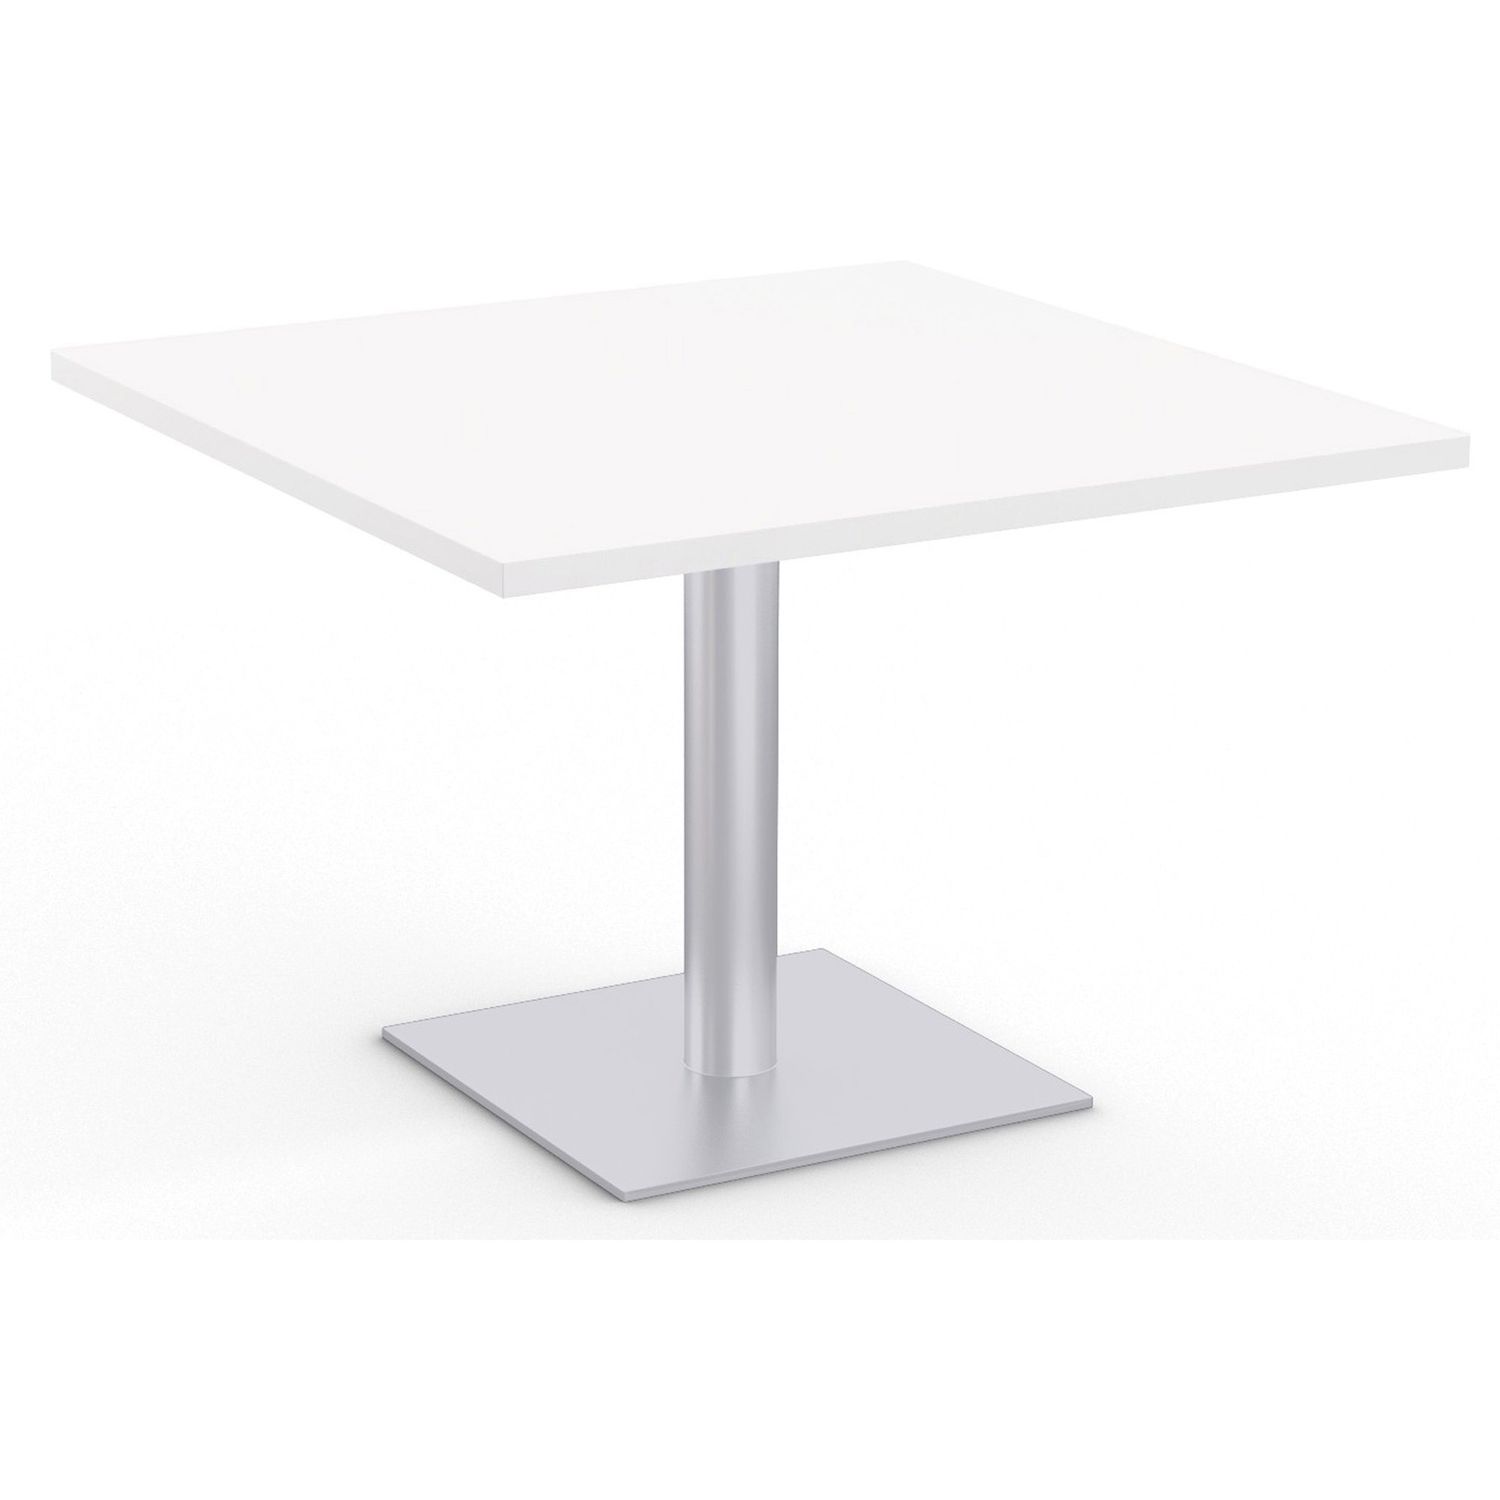 Sienna Hospitality Table High Pressure Laminate (HPL) Square Top, Powder Coated Base, 36" Table Top Length x 36" Table Top Width x 1.13" Table Top Depth, 29" Height, Assembly Required, Designer White